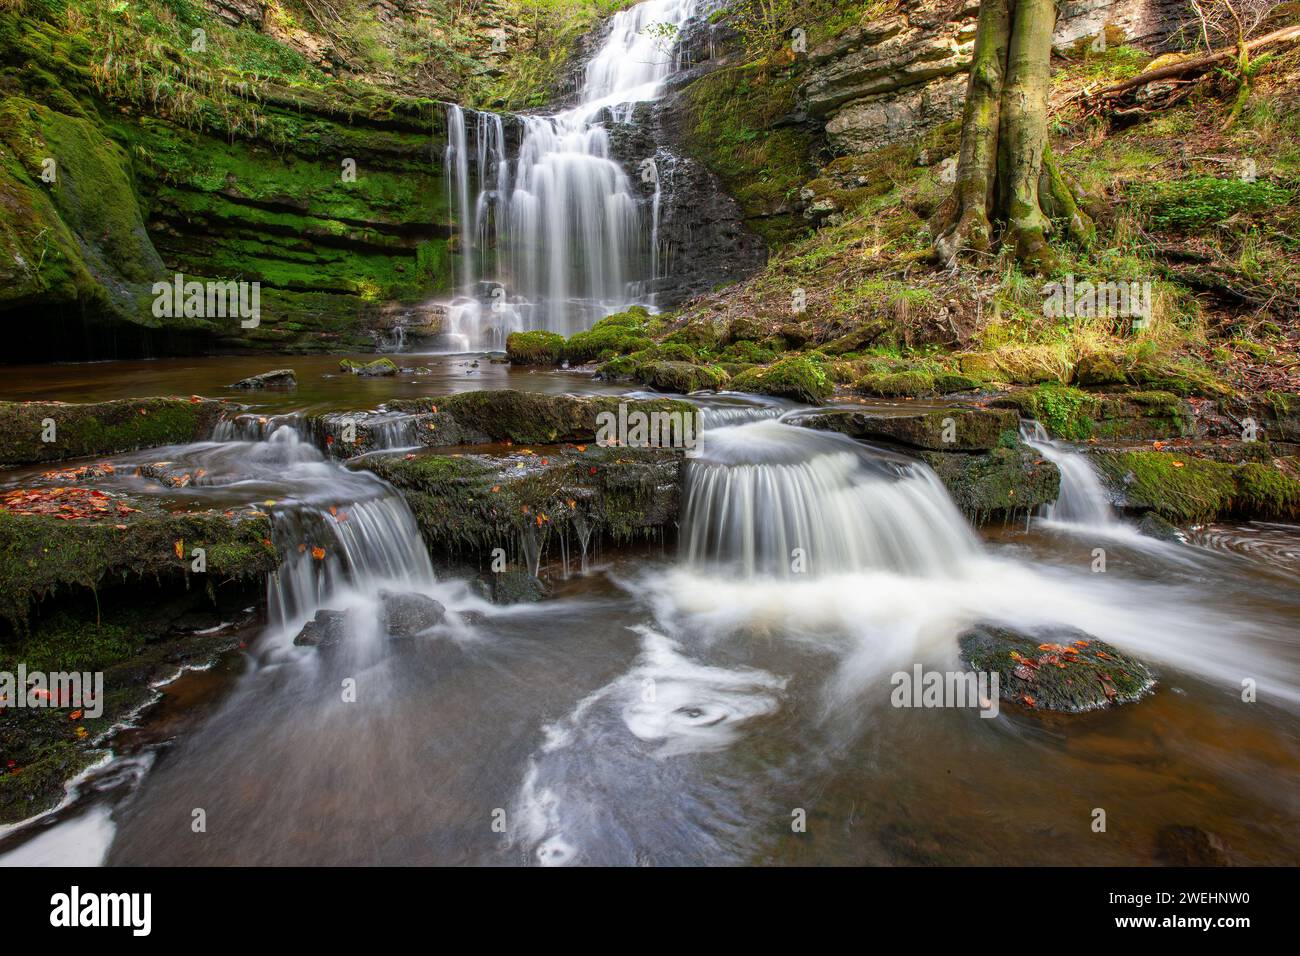 Scaleber Force. a waterfall in the North Yorkshire Dales close to Settle. Yorkshire Dales National Park, Yorkshire, England, United Kingdom Stock Photo